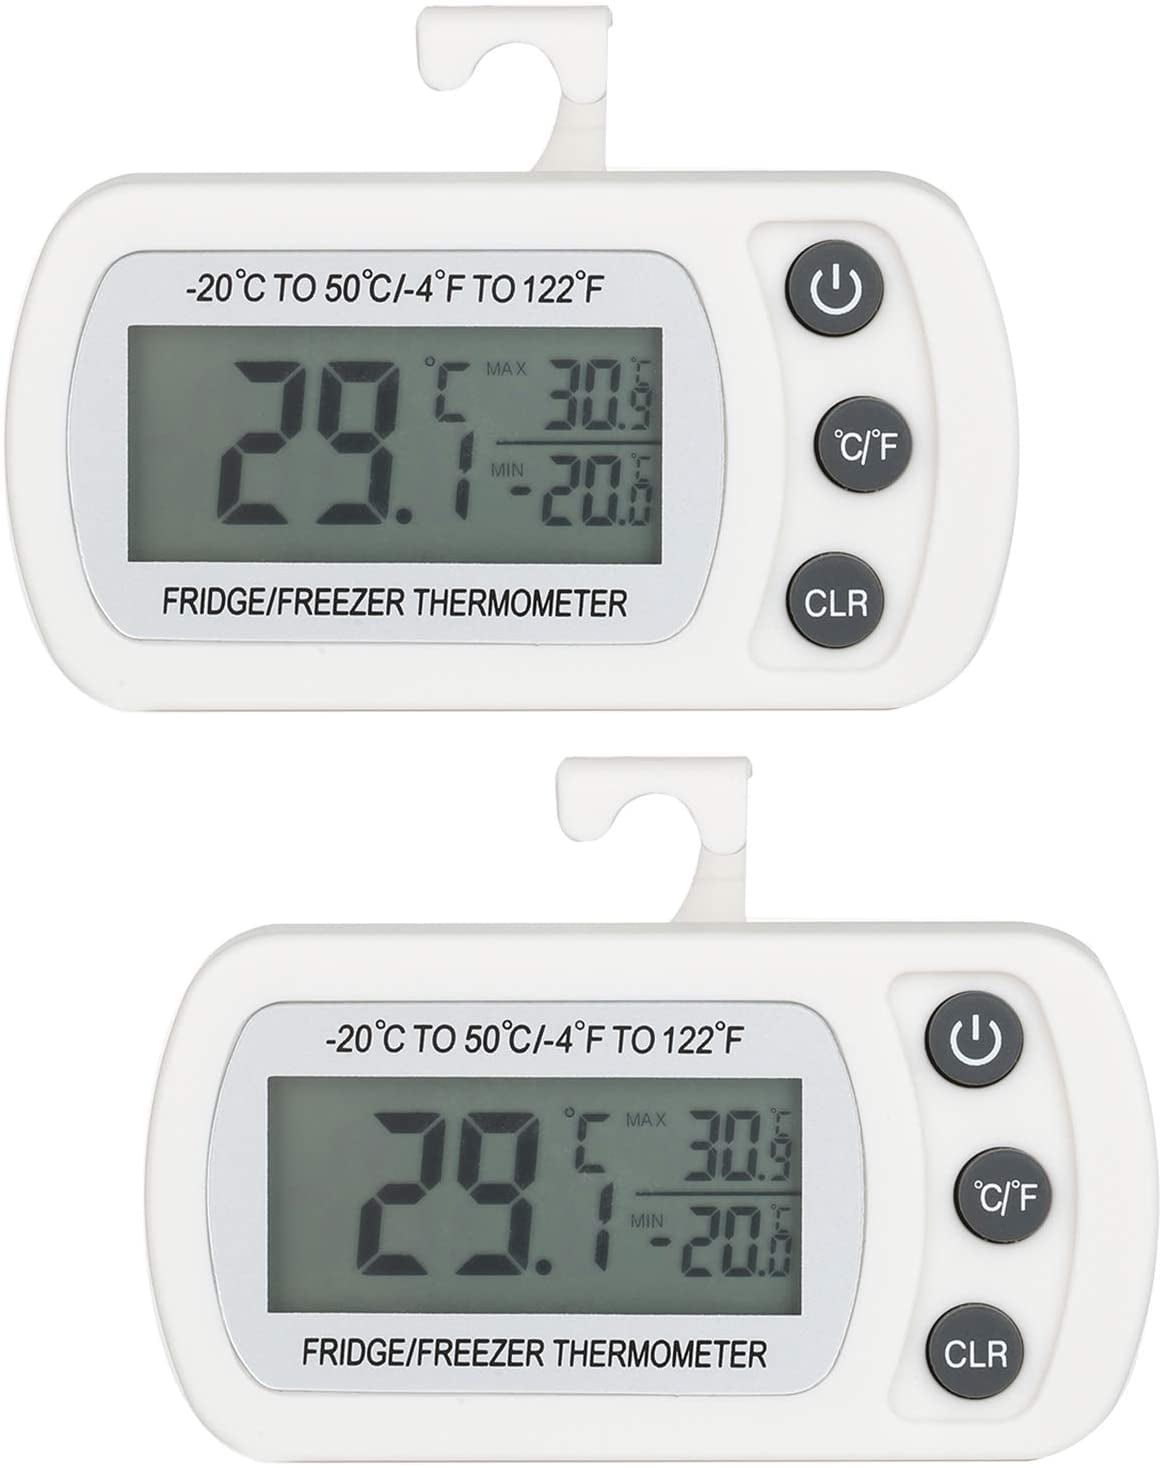 50 to 70°C Range Thermco ACC801FRE Digital Bottle Thermometer for Freezers Application